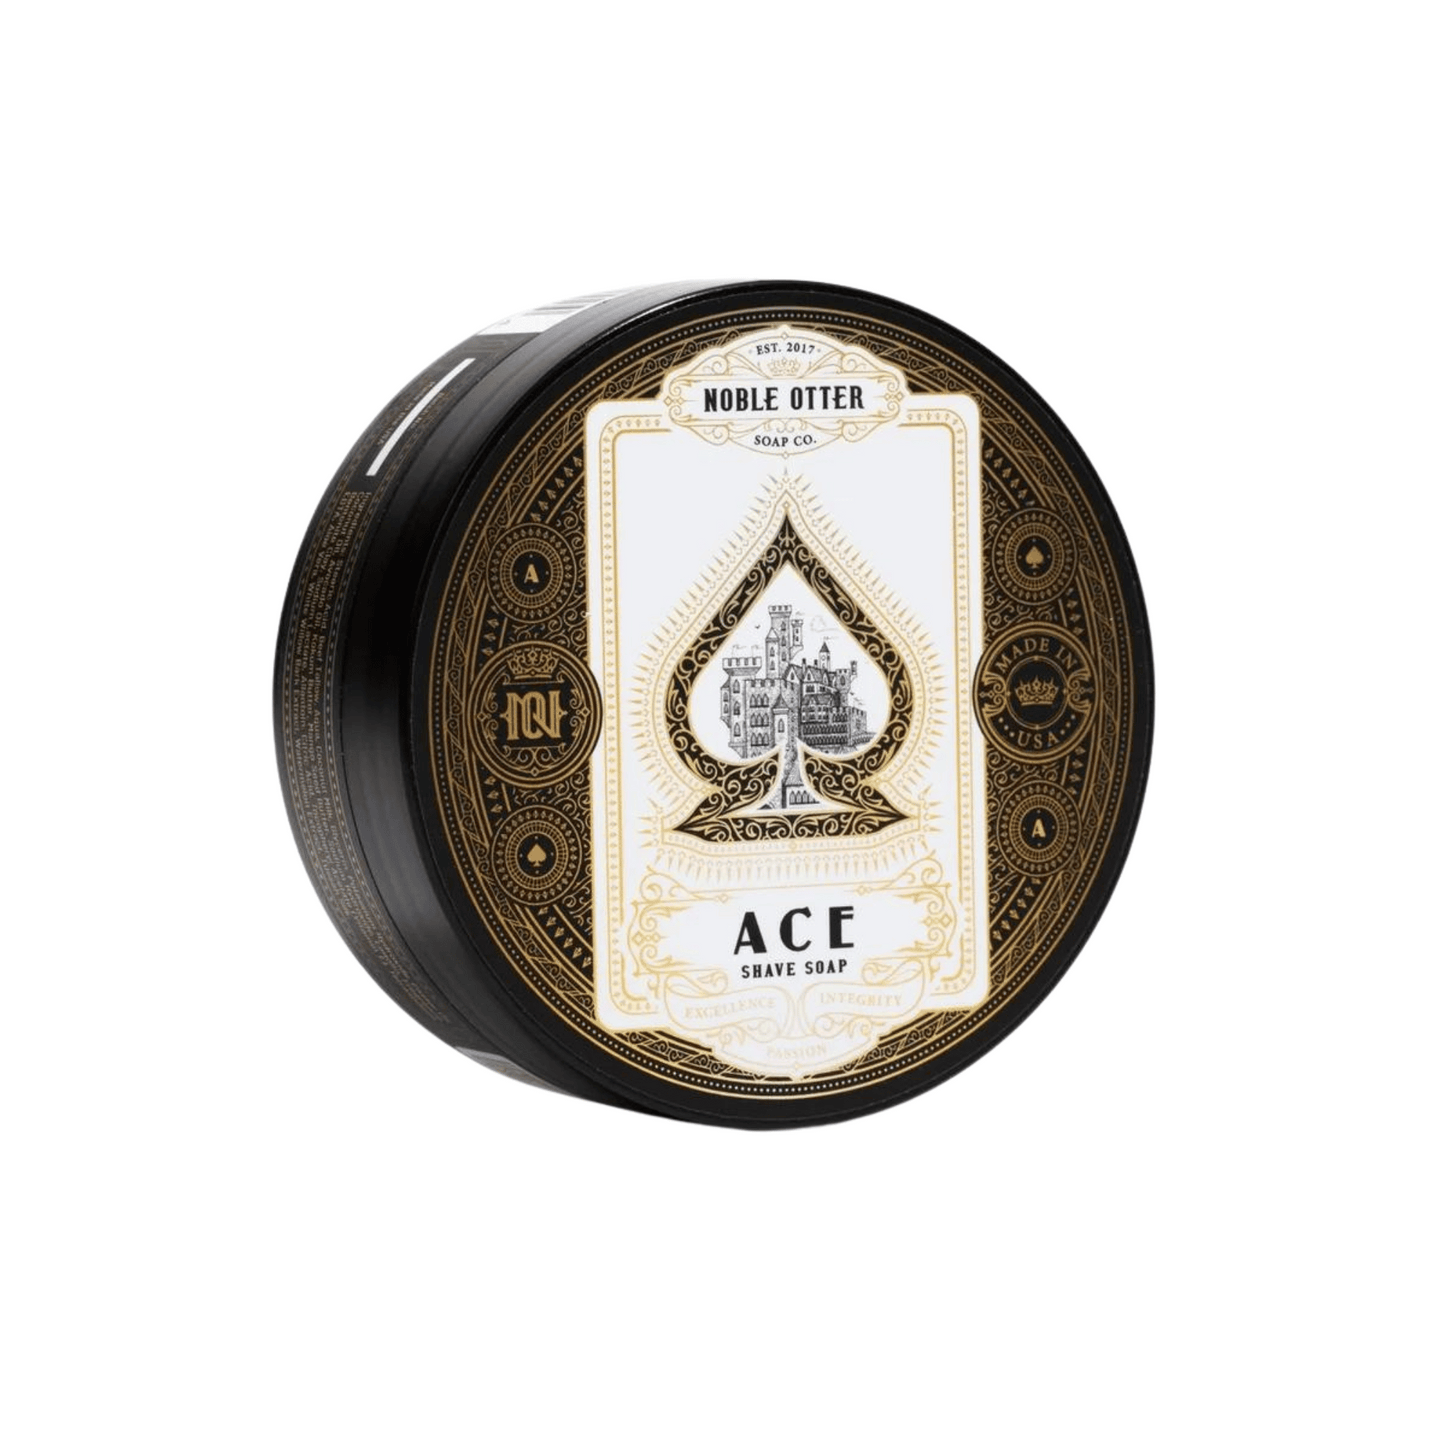 Primary Image of Ace Shave Soap